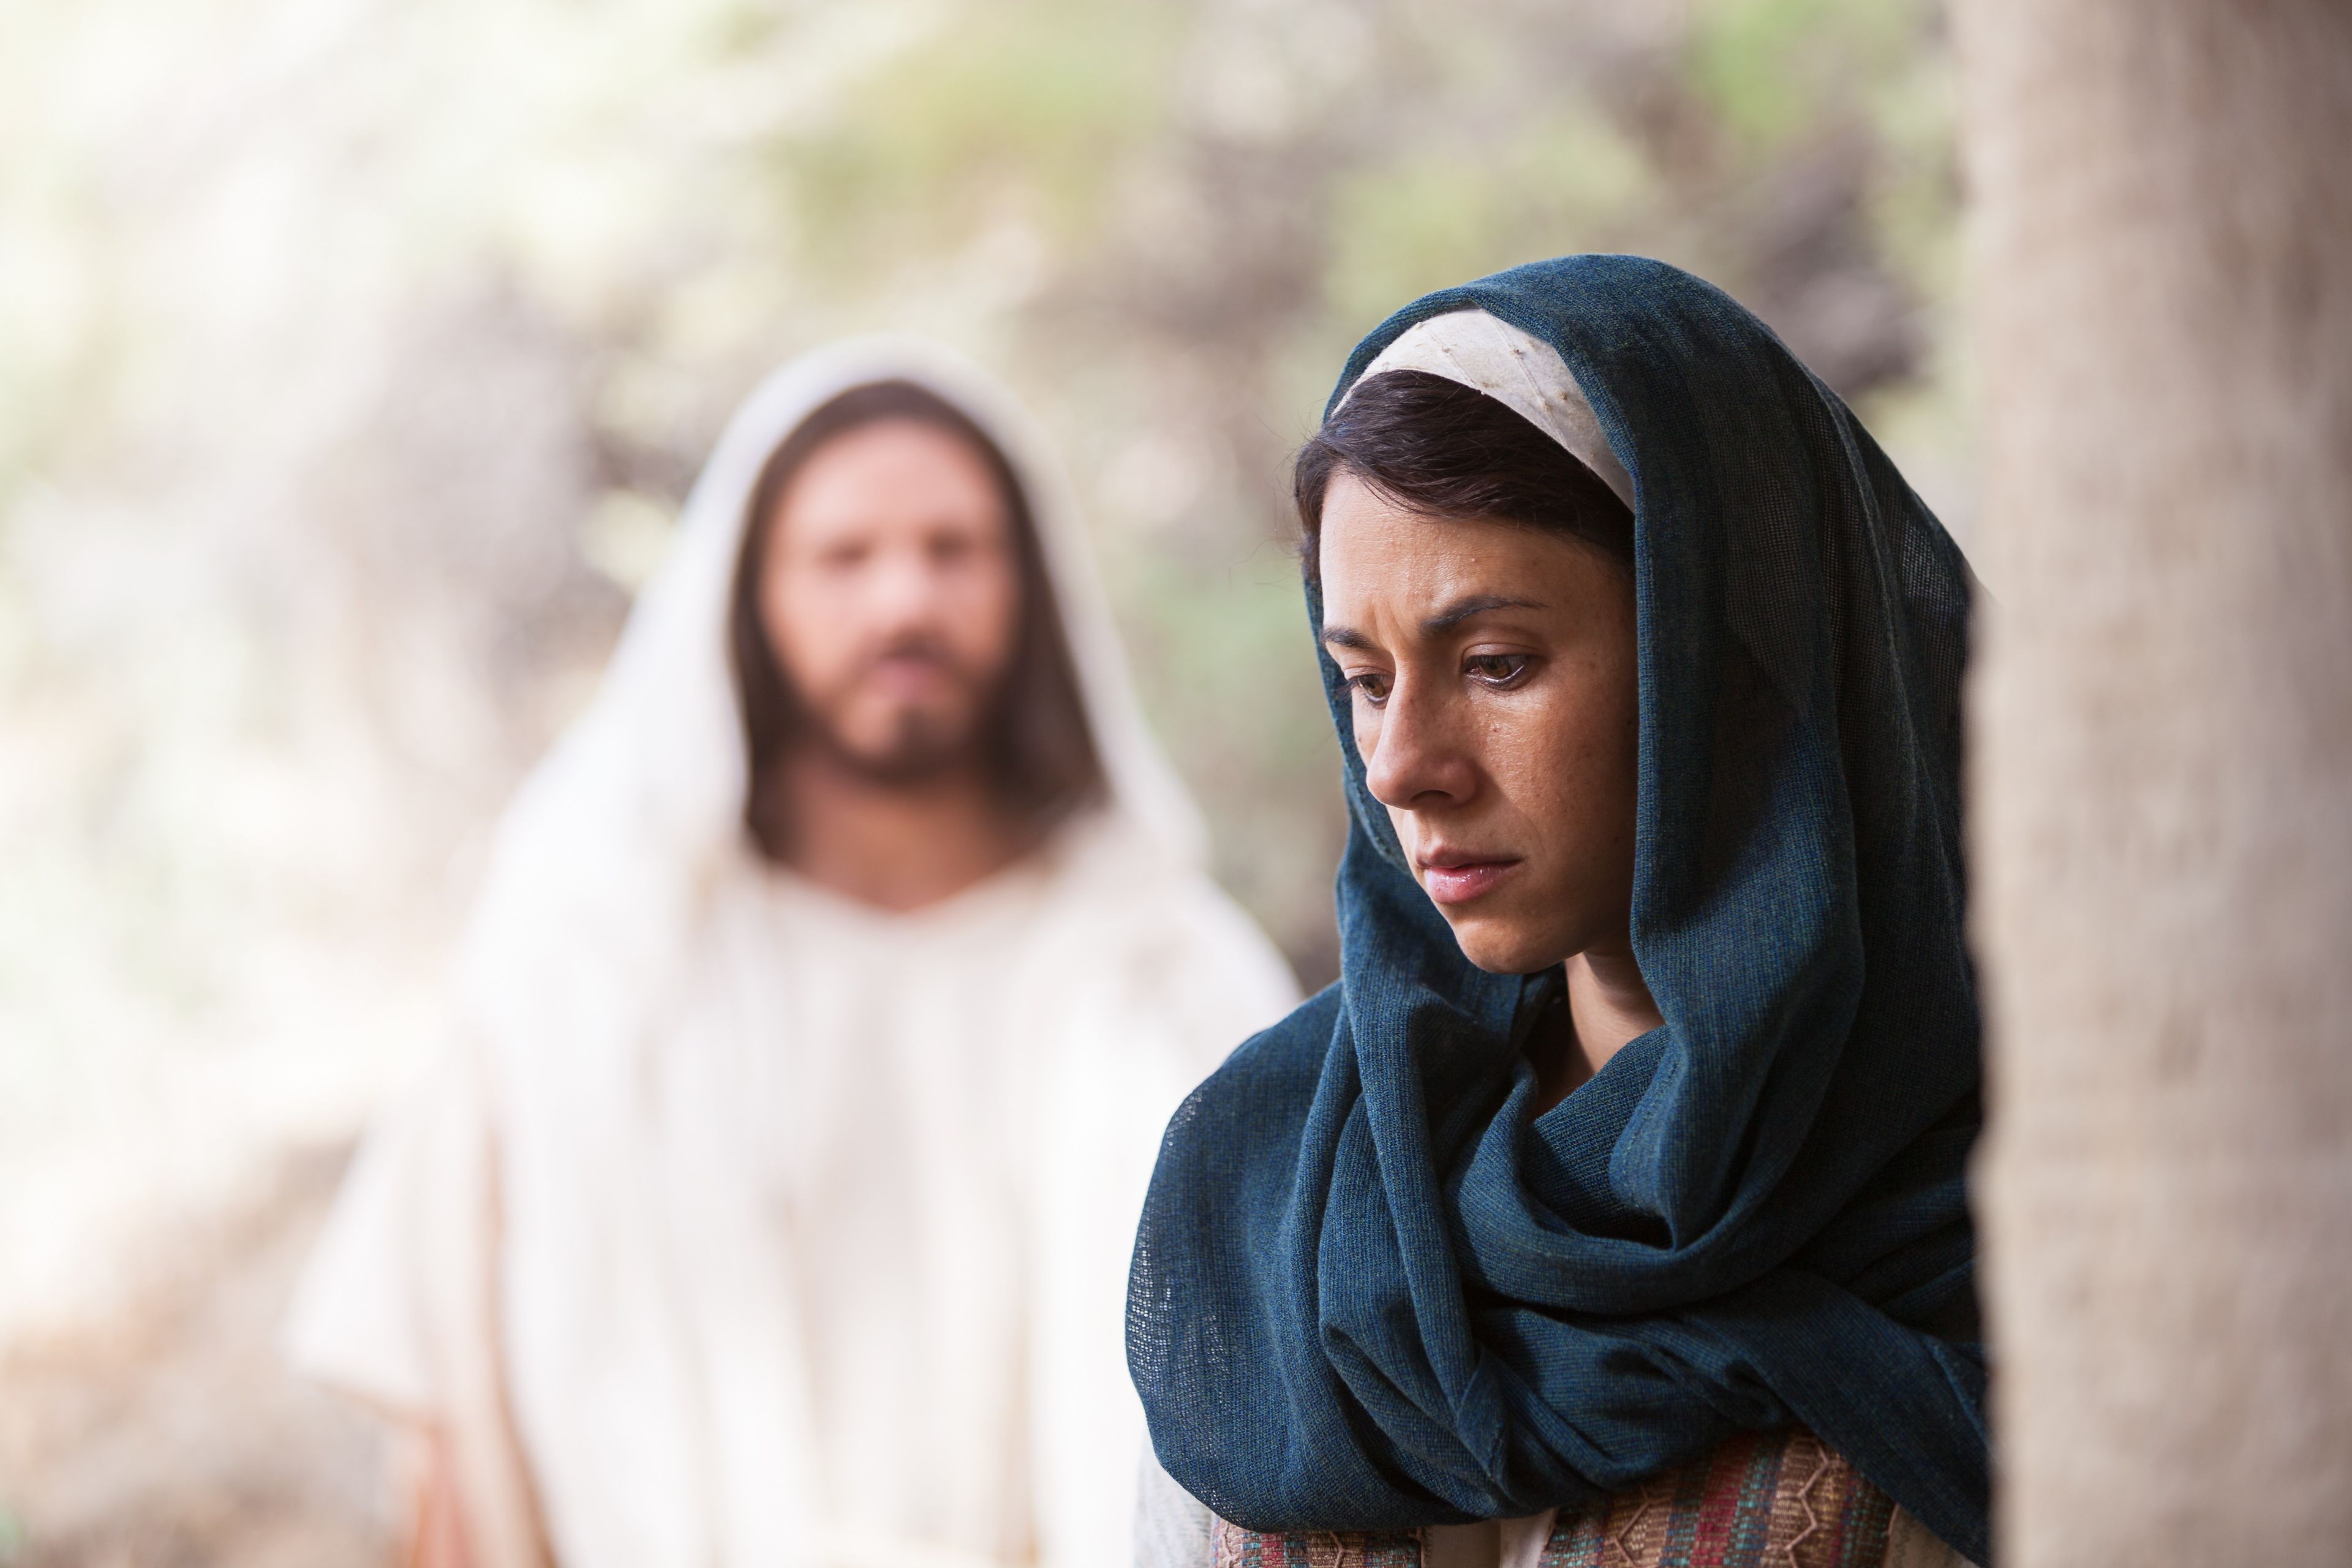 Mary Magdalene hears the voice of Christ while seeking Him at the tomb.